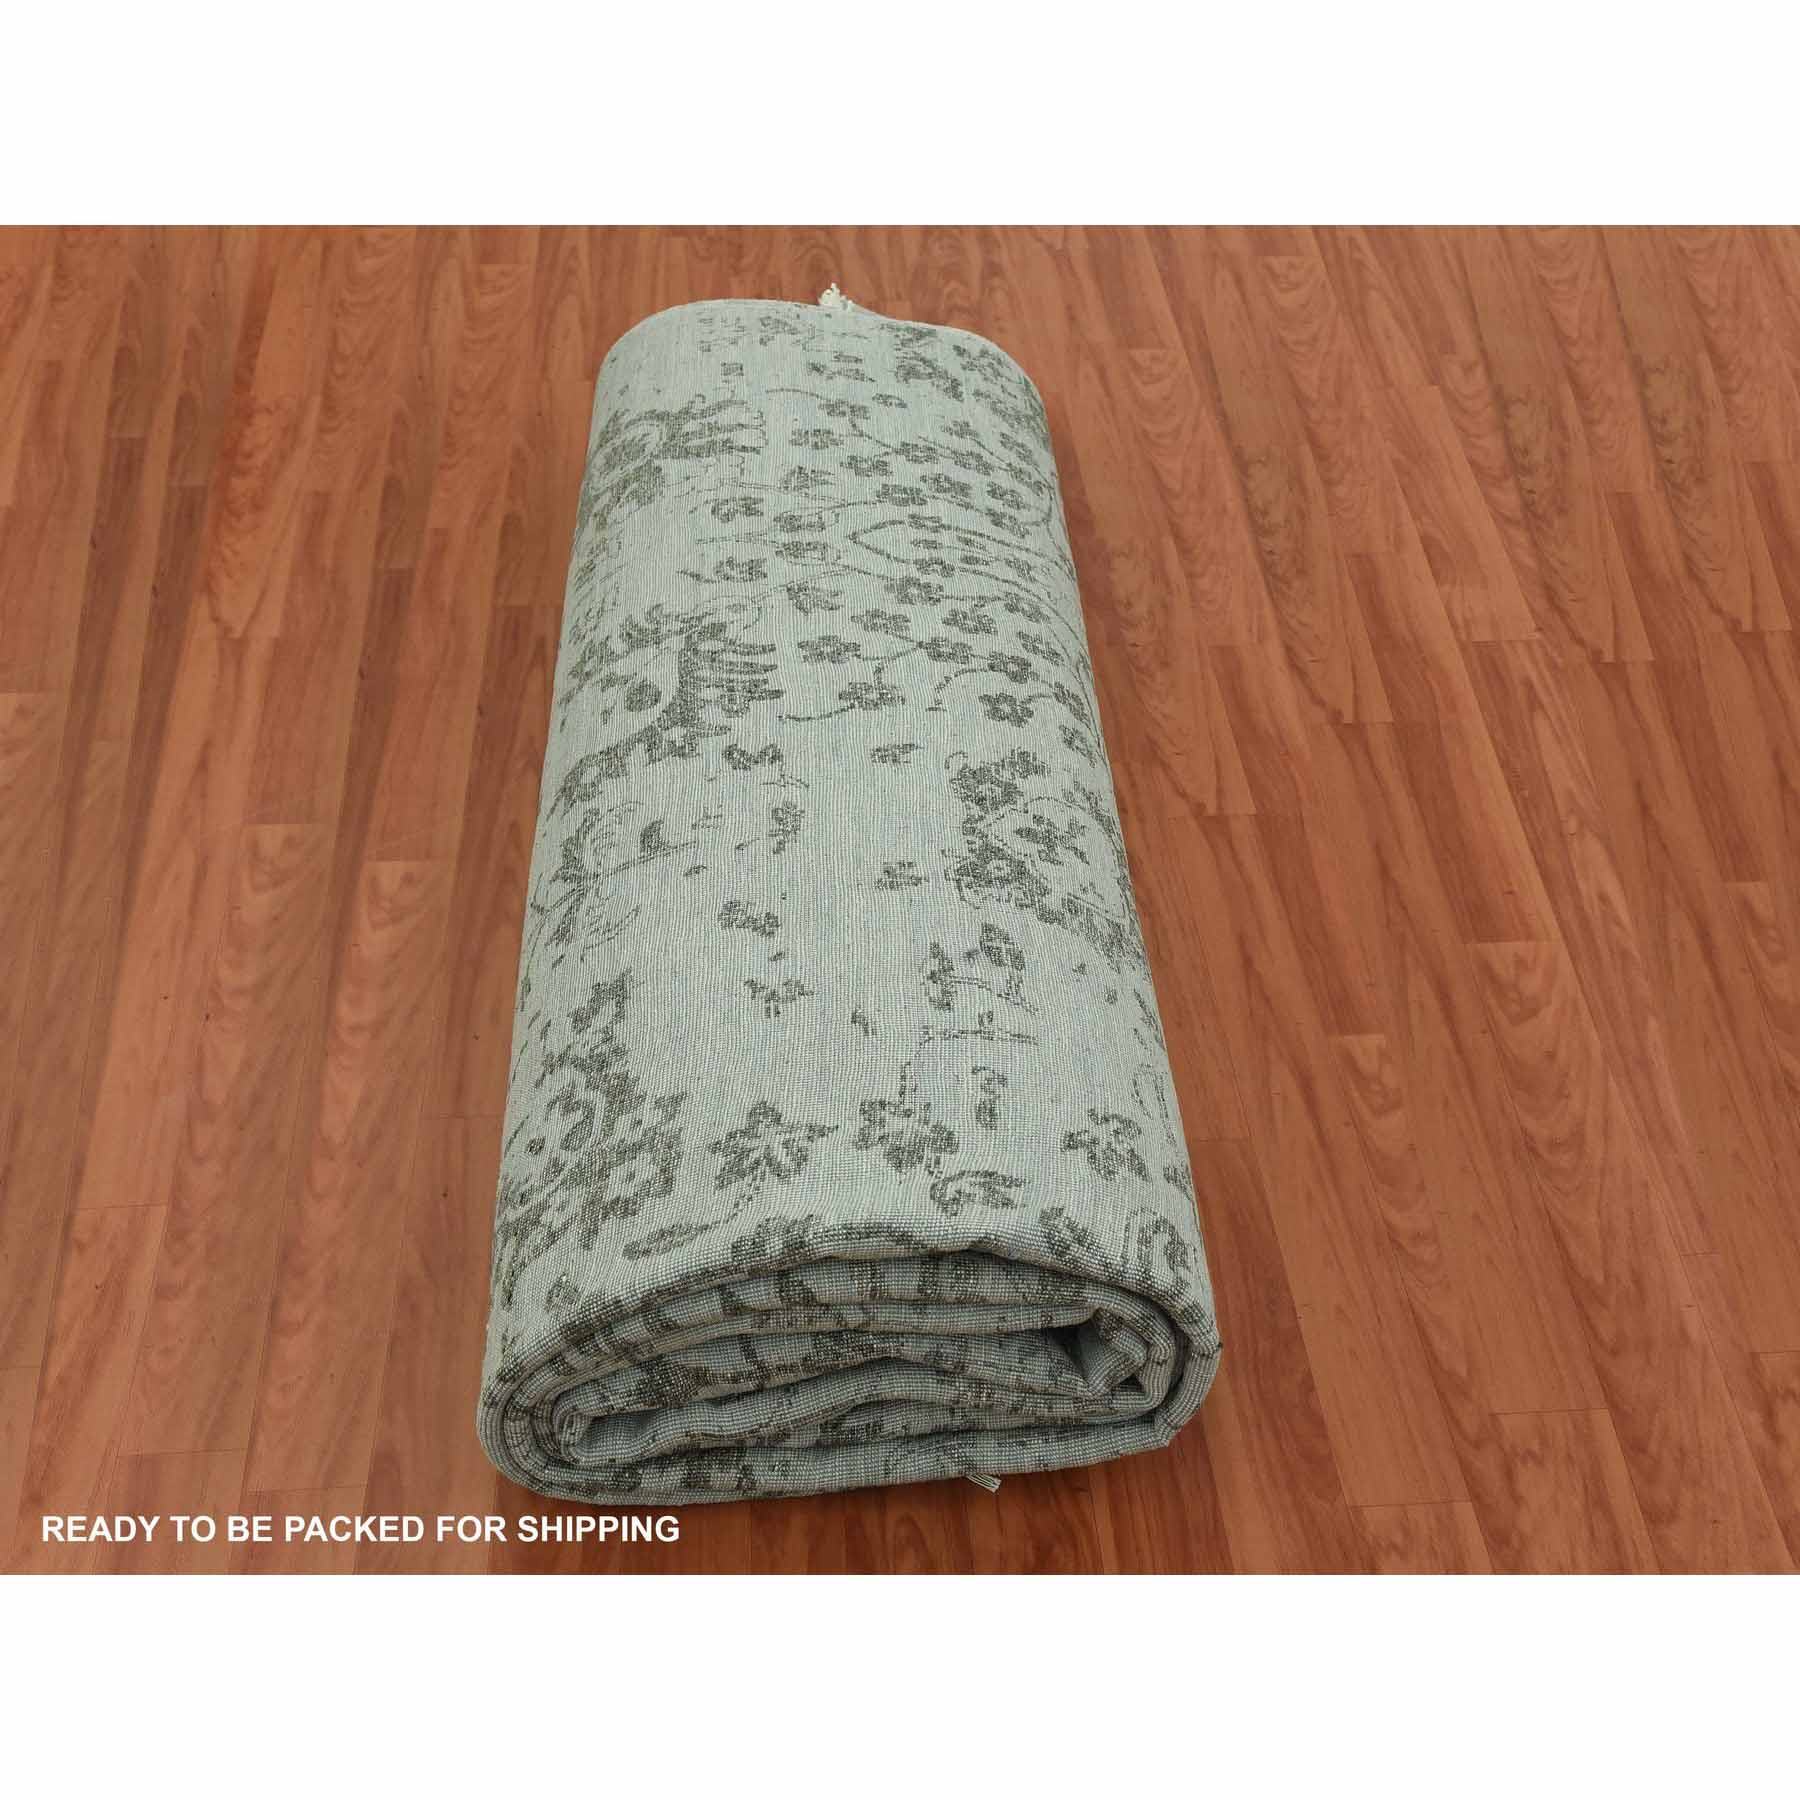 Modern-and-Contemporary-Hand-Knotted-Rug-396445